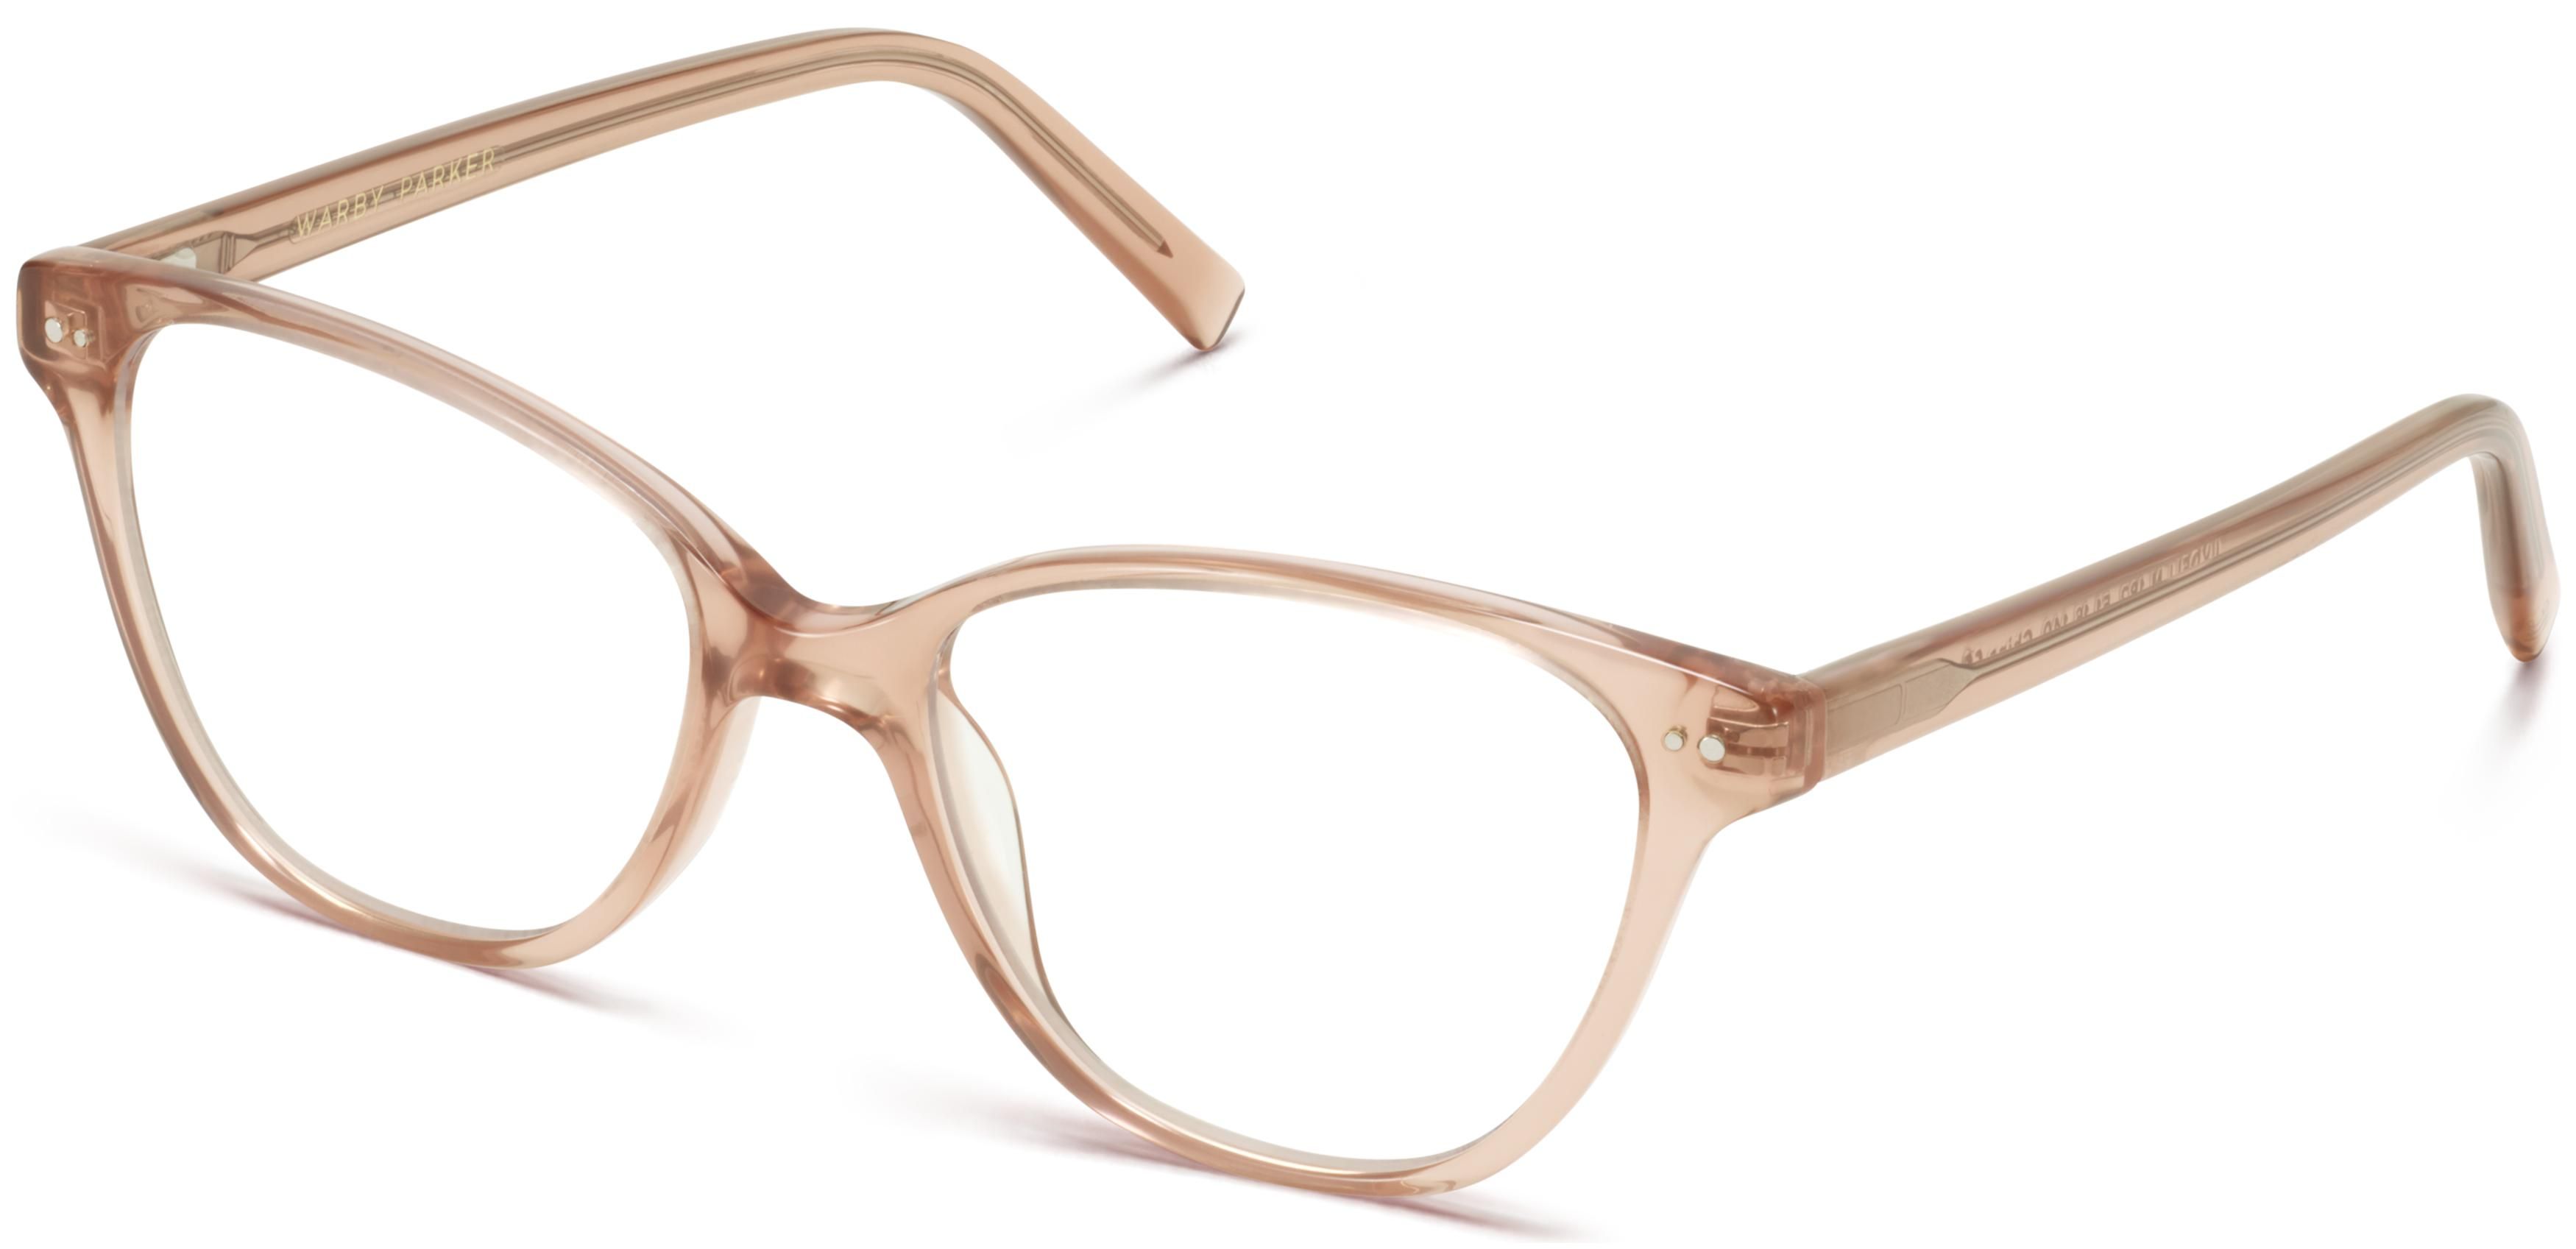 Lydell Eyeglasses in Nectar | Warby Parker | Warby Parker (US)